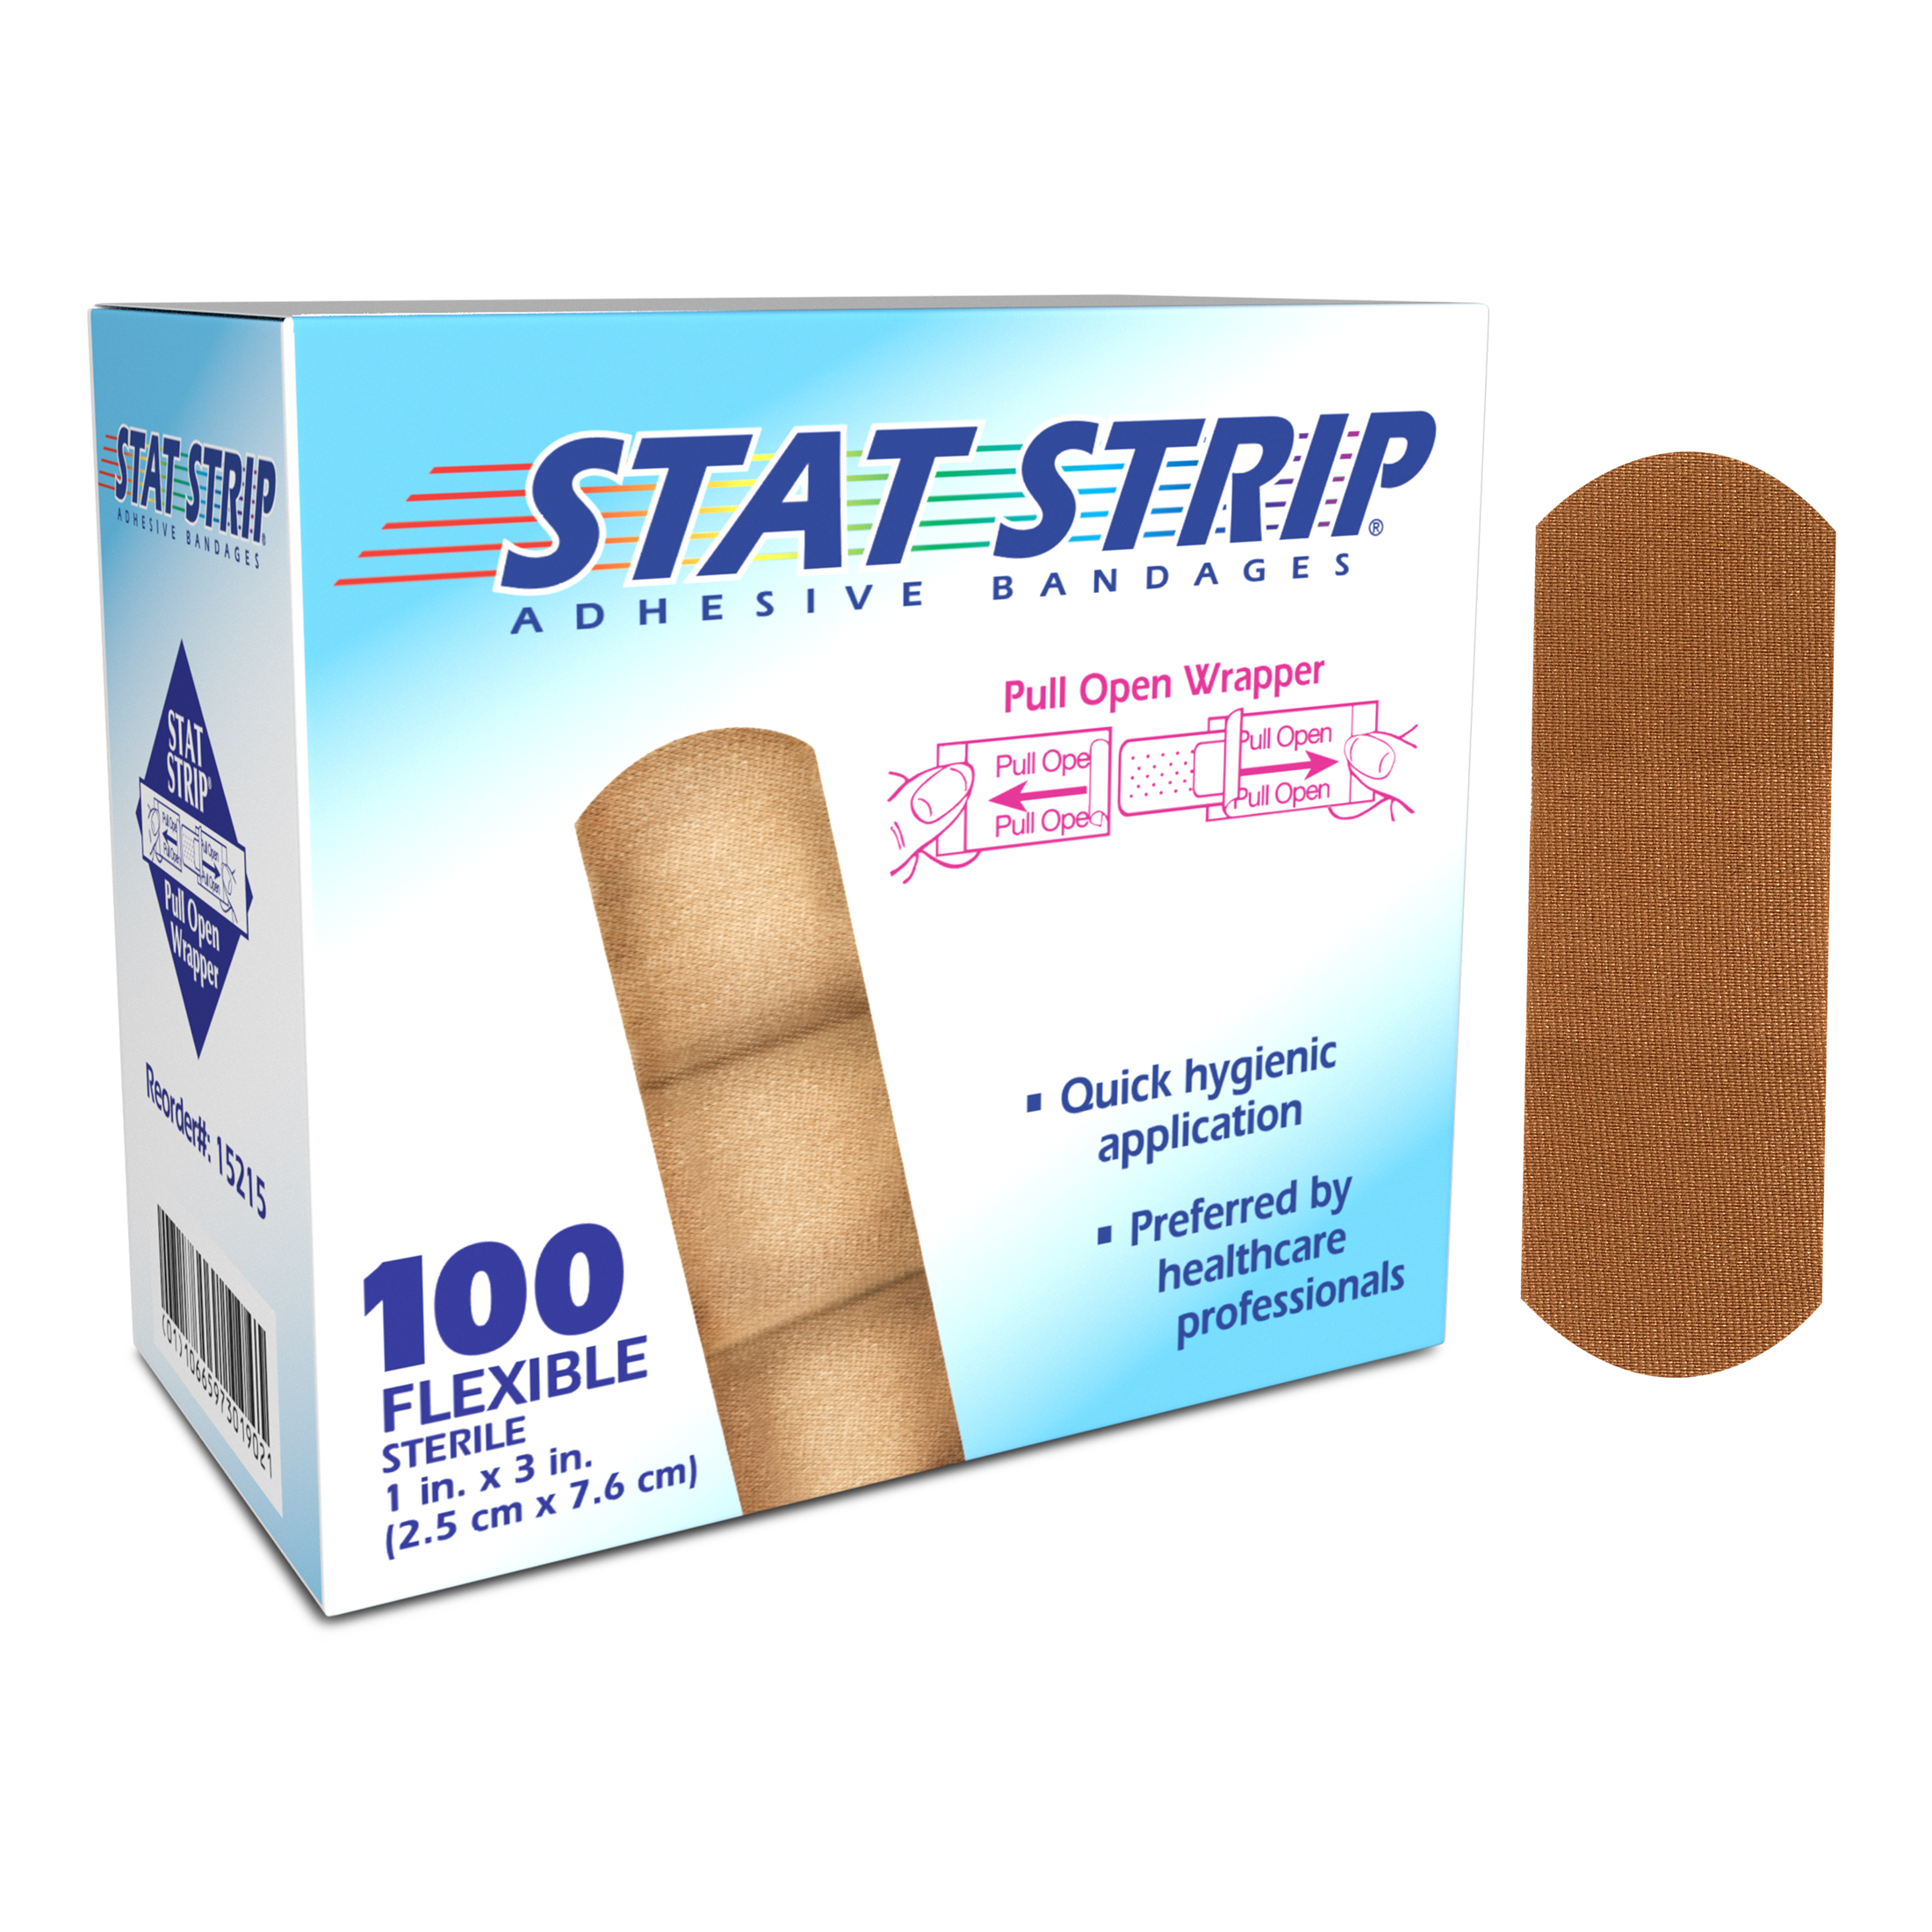 1" x 3" Adhesive Bandages Products, Supplies and Equipment